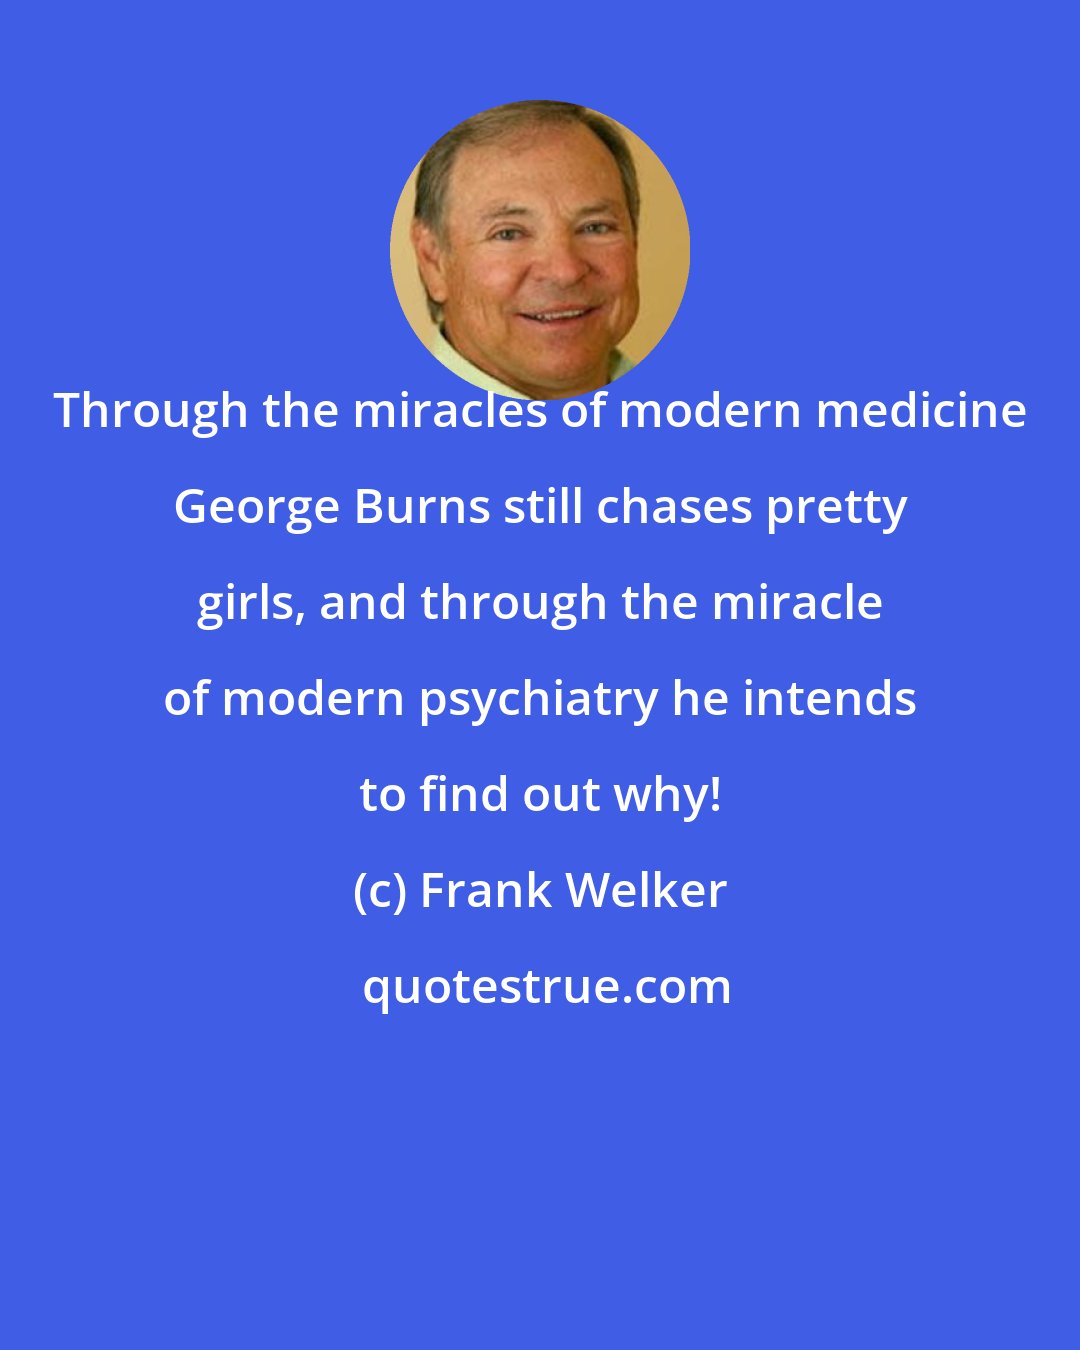 Frank Welker: Through the miracles of modern medicine George Burns still chases pretty girls, and through the miracle of modern psychiatry he intends to find out why!